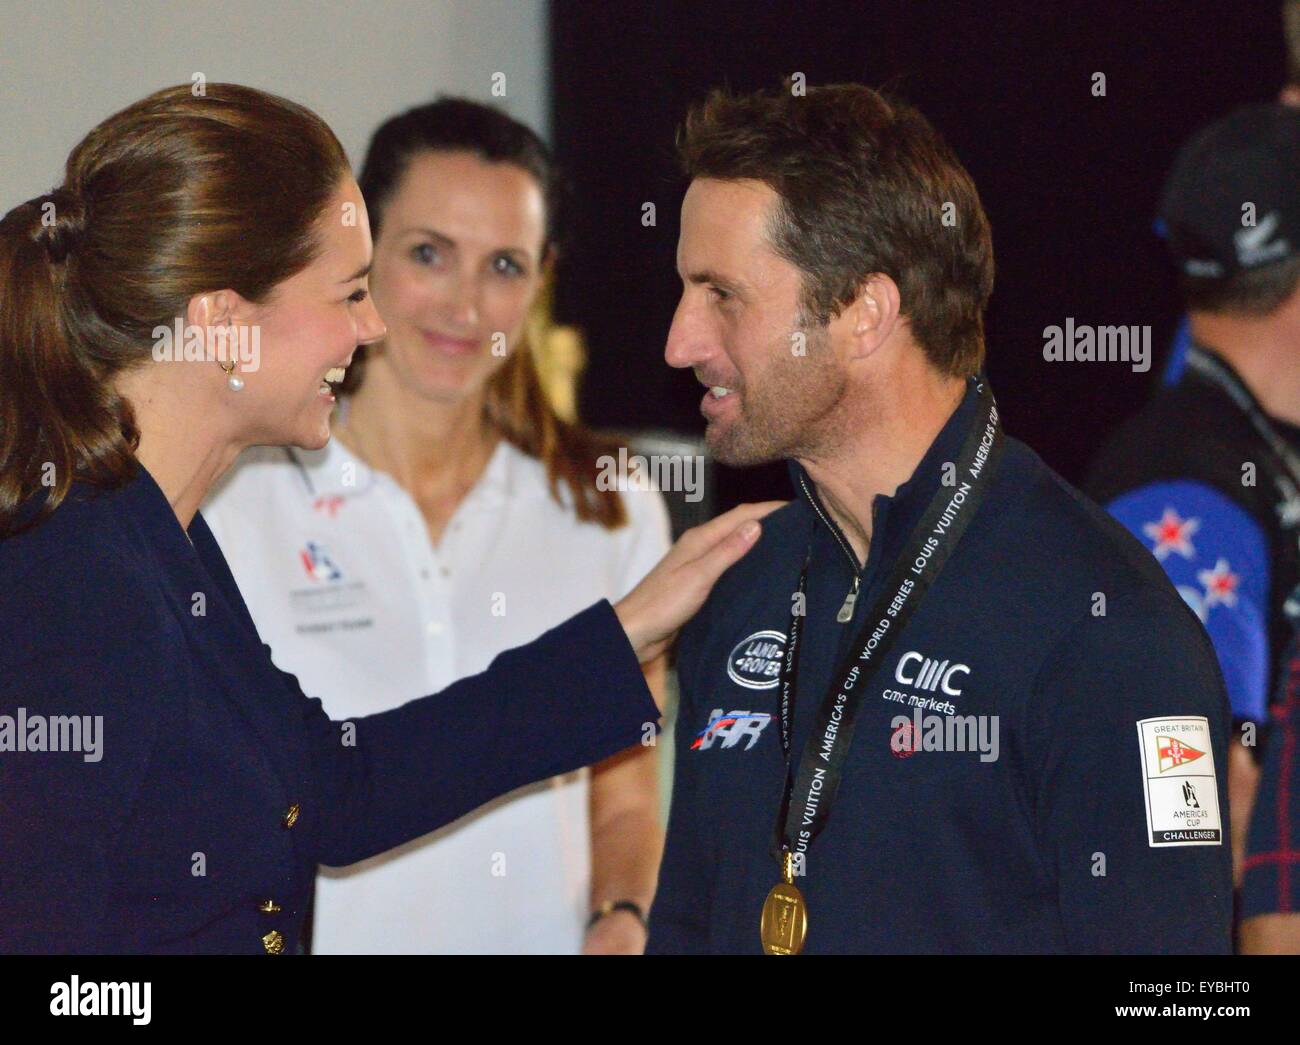 Portsmouth, Hampshire, UK. 26th July, 2015. The Duke and Duchess of Cambridge present Sir Ben Ainslie, skipper of the British 'Land Rover BAR' team with the cup for winning the Louis Vuitton America's Cup World Series Portsmouth at the official prize giving.  The cup was designed by 5 year old Leo Howard from a local school on behalf of the 1851 Trust and made by artist Michelle Littlewood Credit:  Wendy Johnson/Alamy Live News  (photographer media accredited for this event) Stock Photo